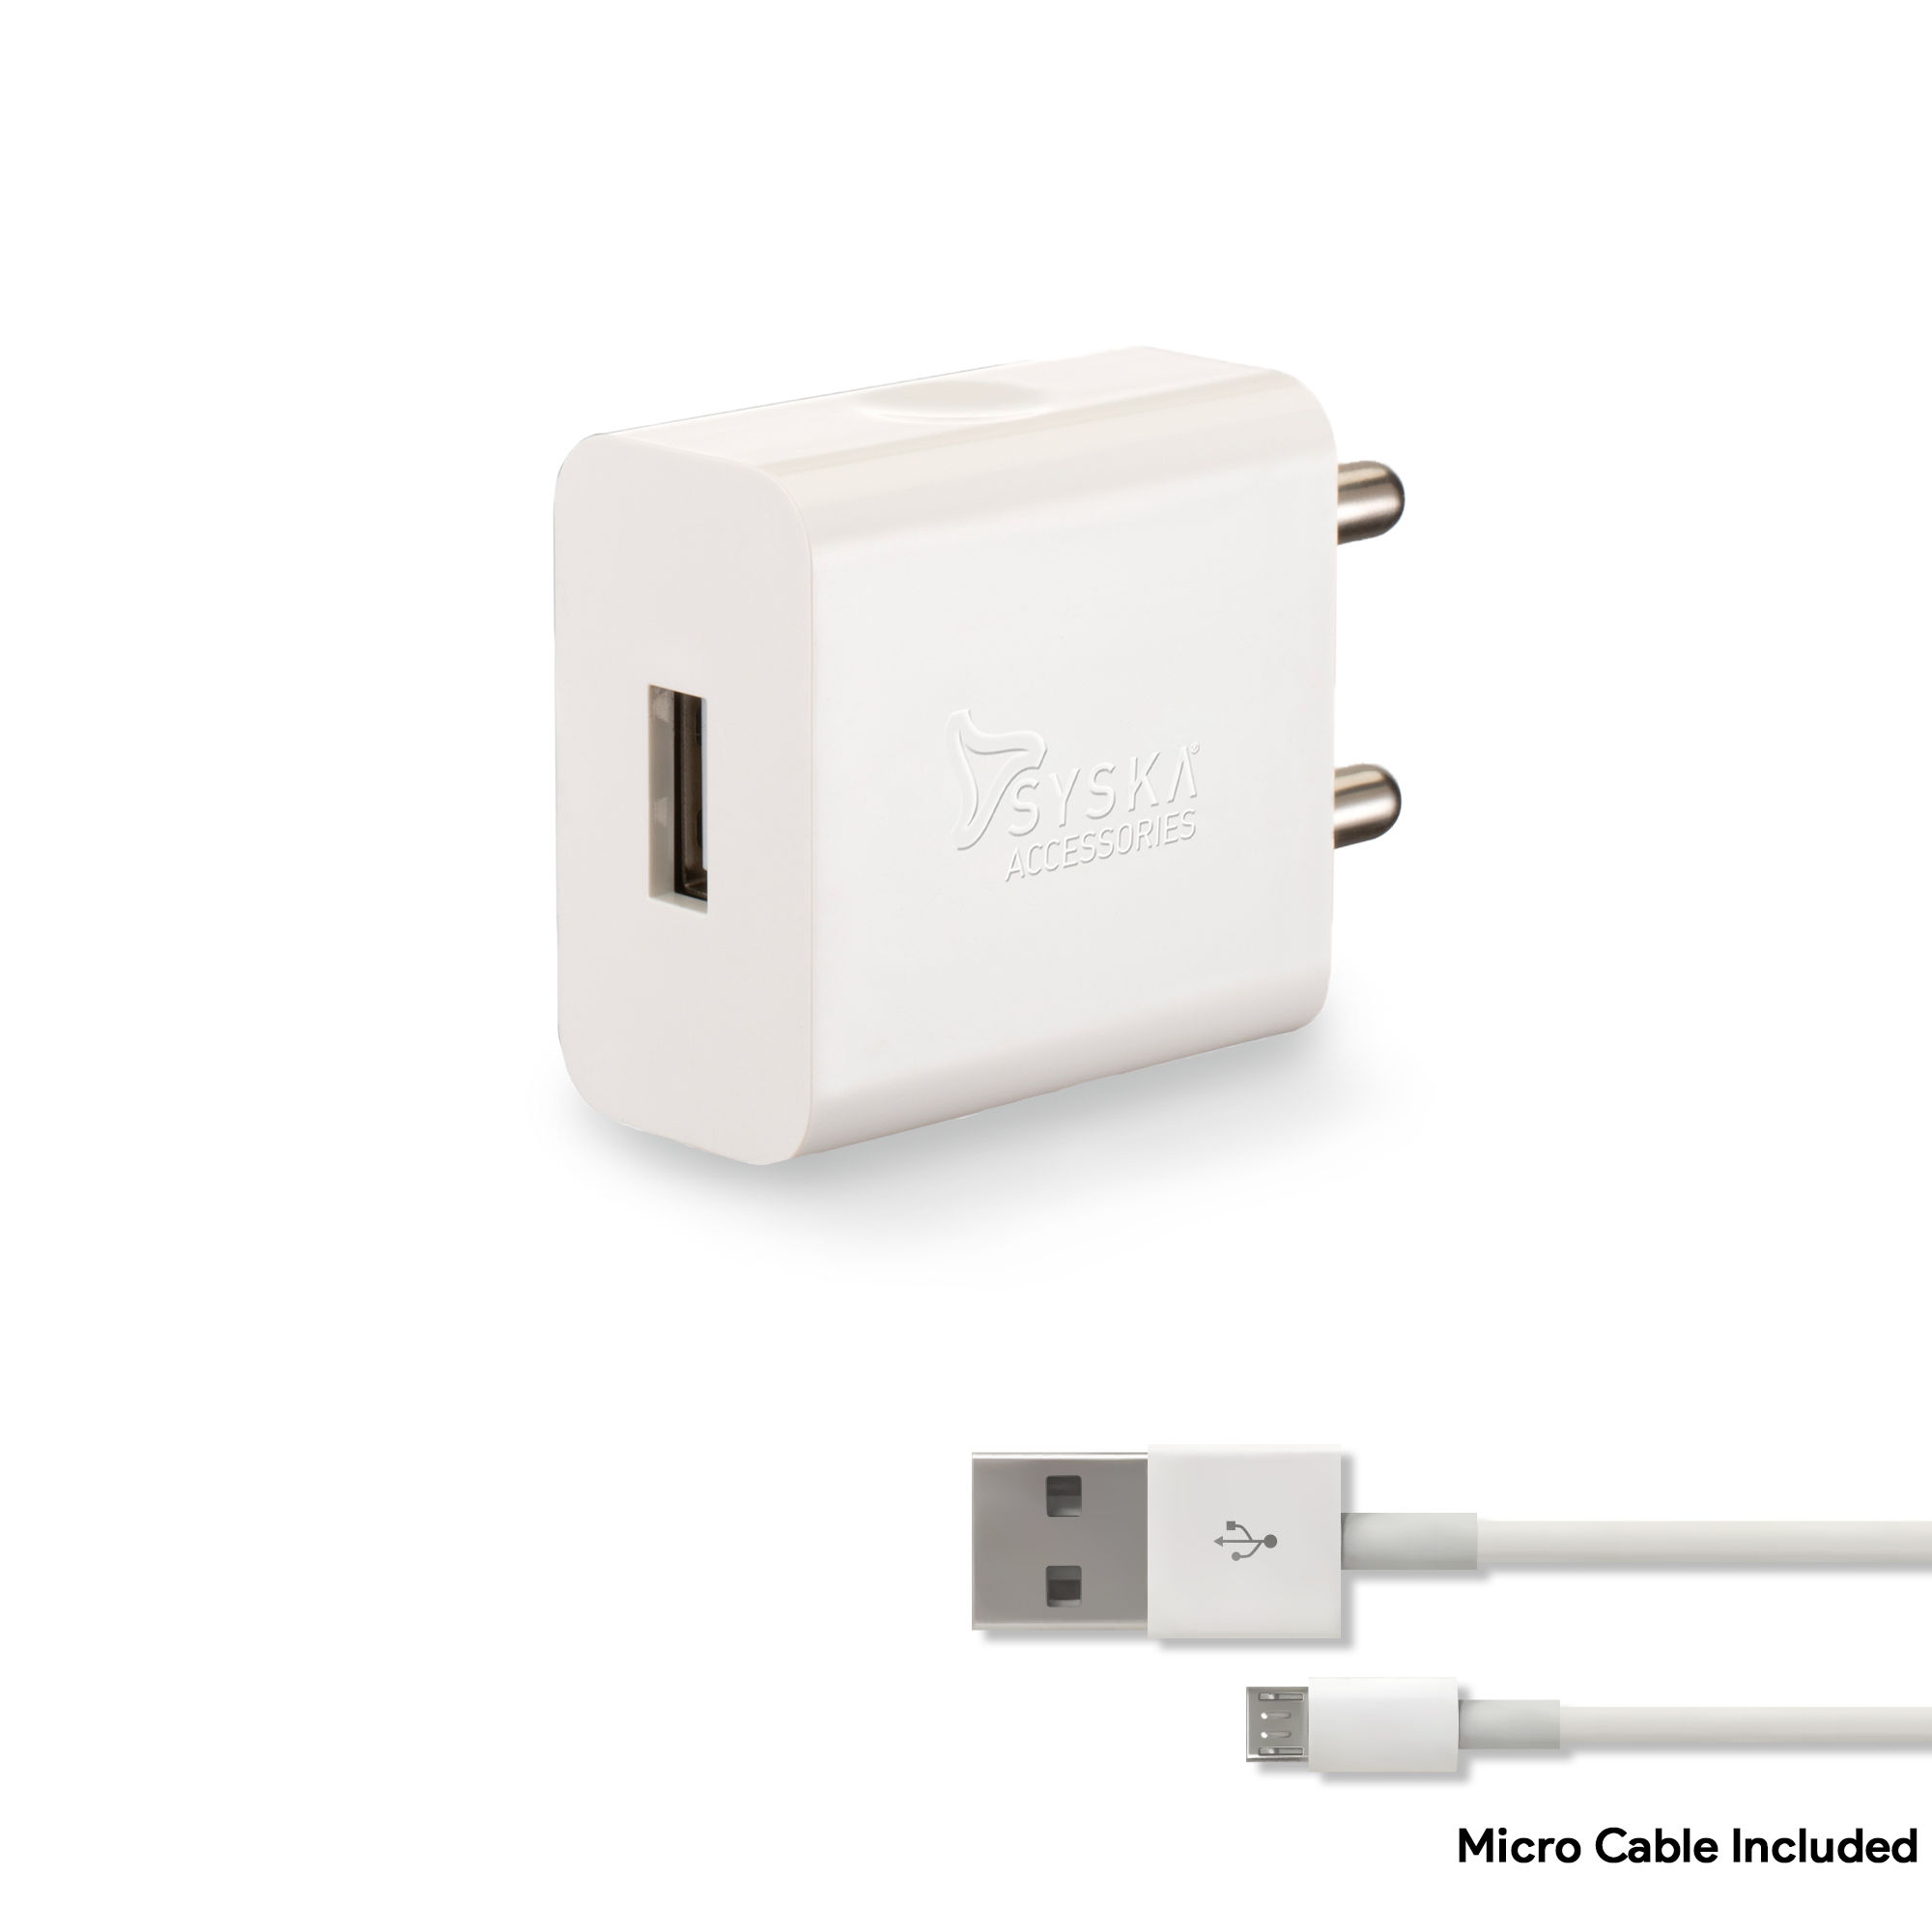 Syska Accessories Wc-2a Charger With Single Port For Fast Charging (white)